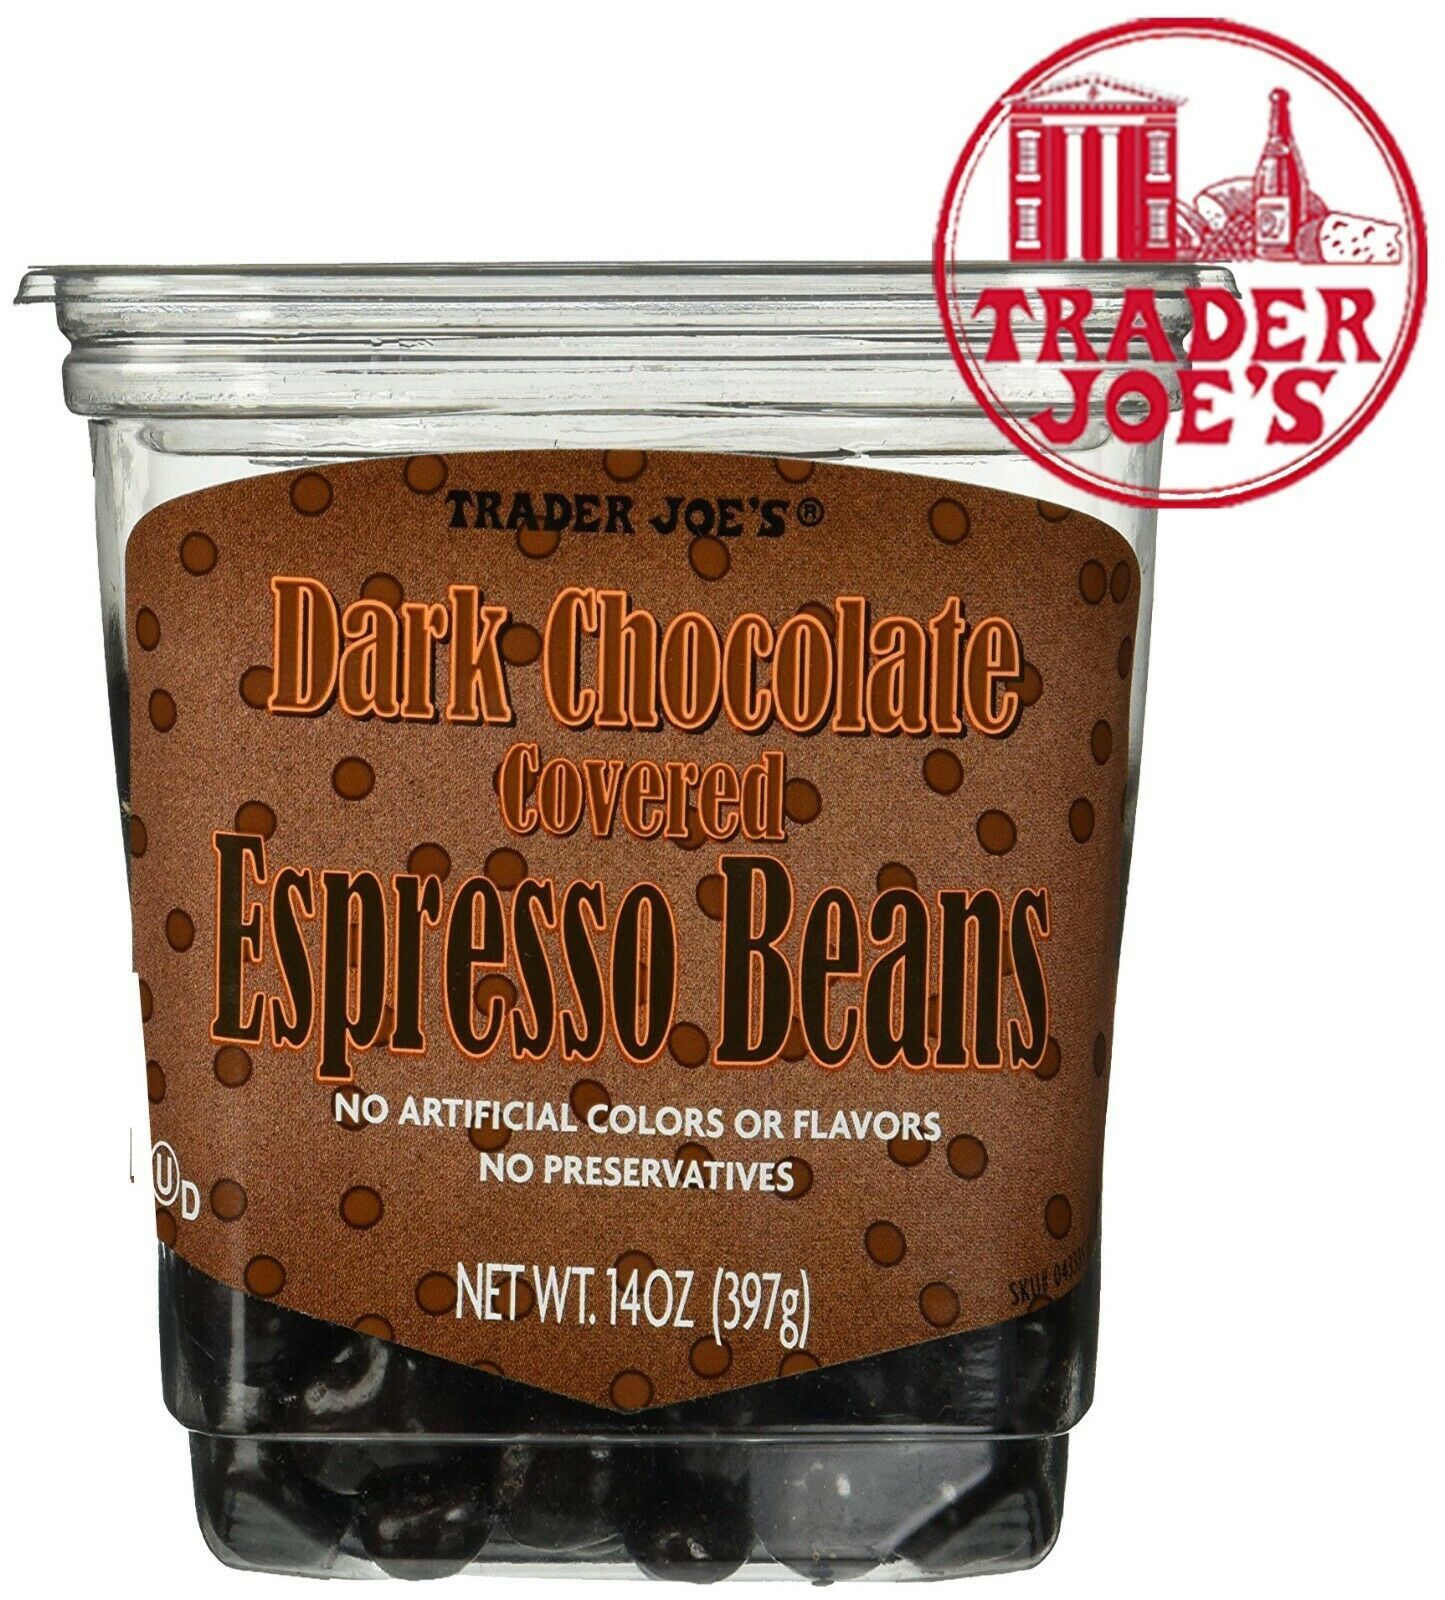 Trader Joes Pound Plus Chocolate Bars from Belgium 1-Pack (Variety